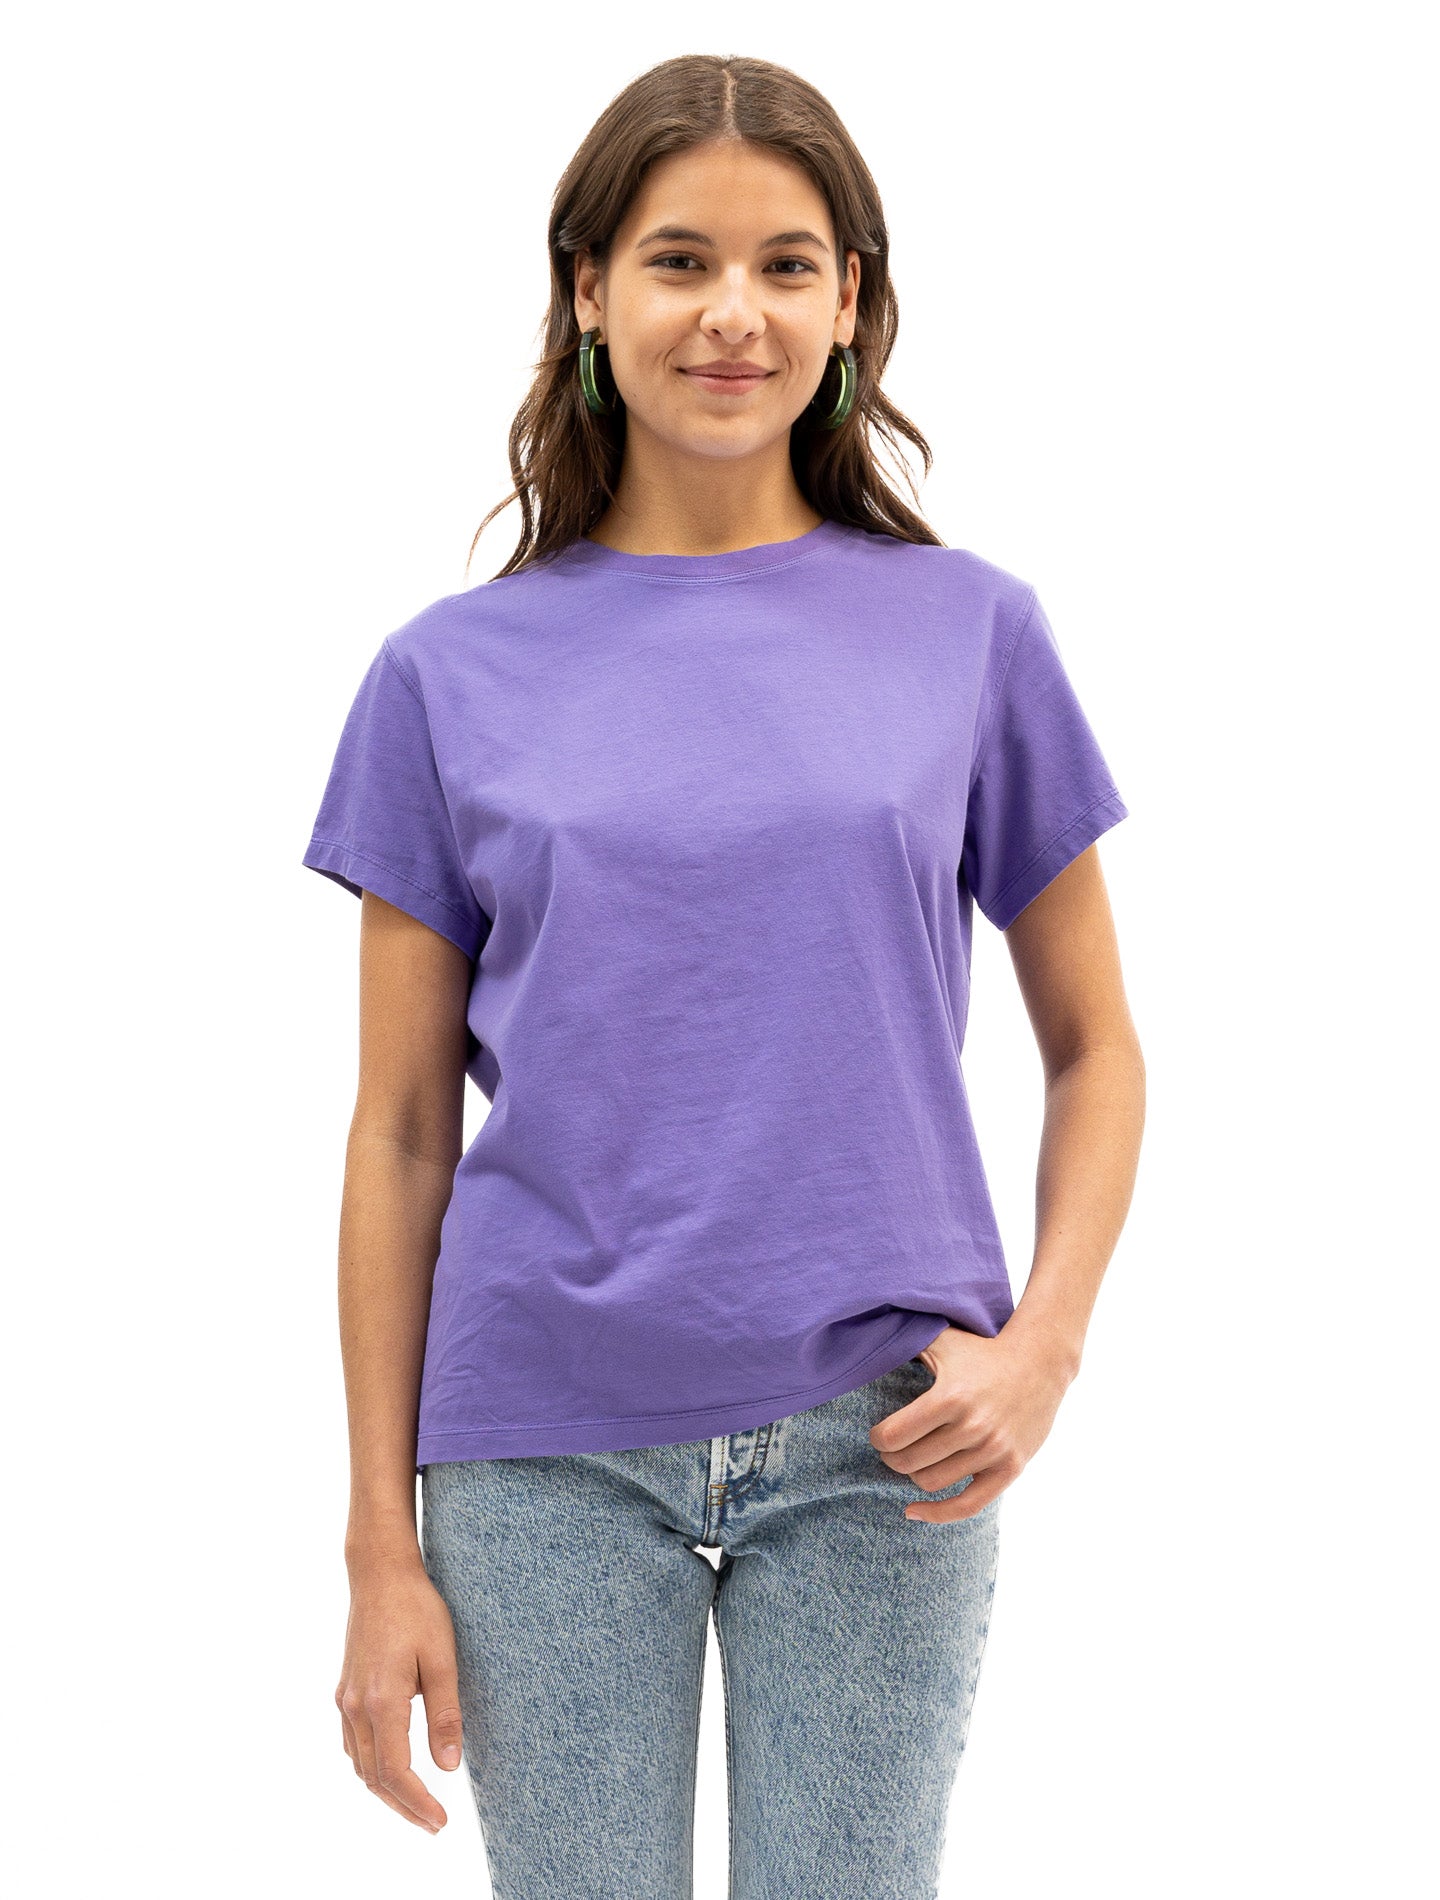 Le tee-shirt Iconic Willie® jersey bio-recyclé Violet ultraviolet